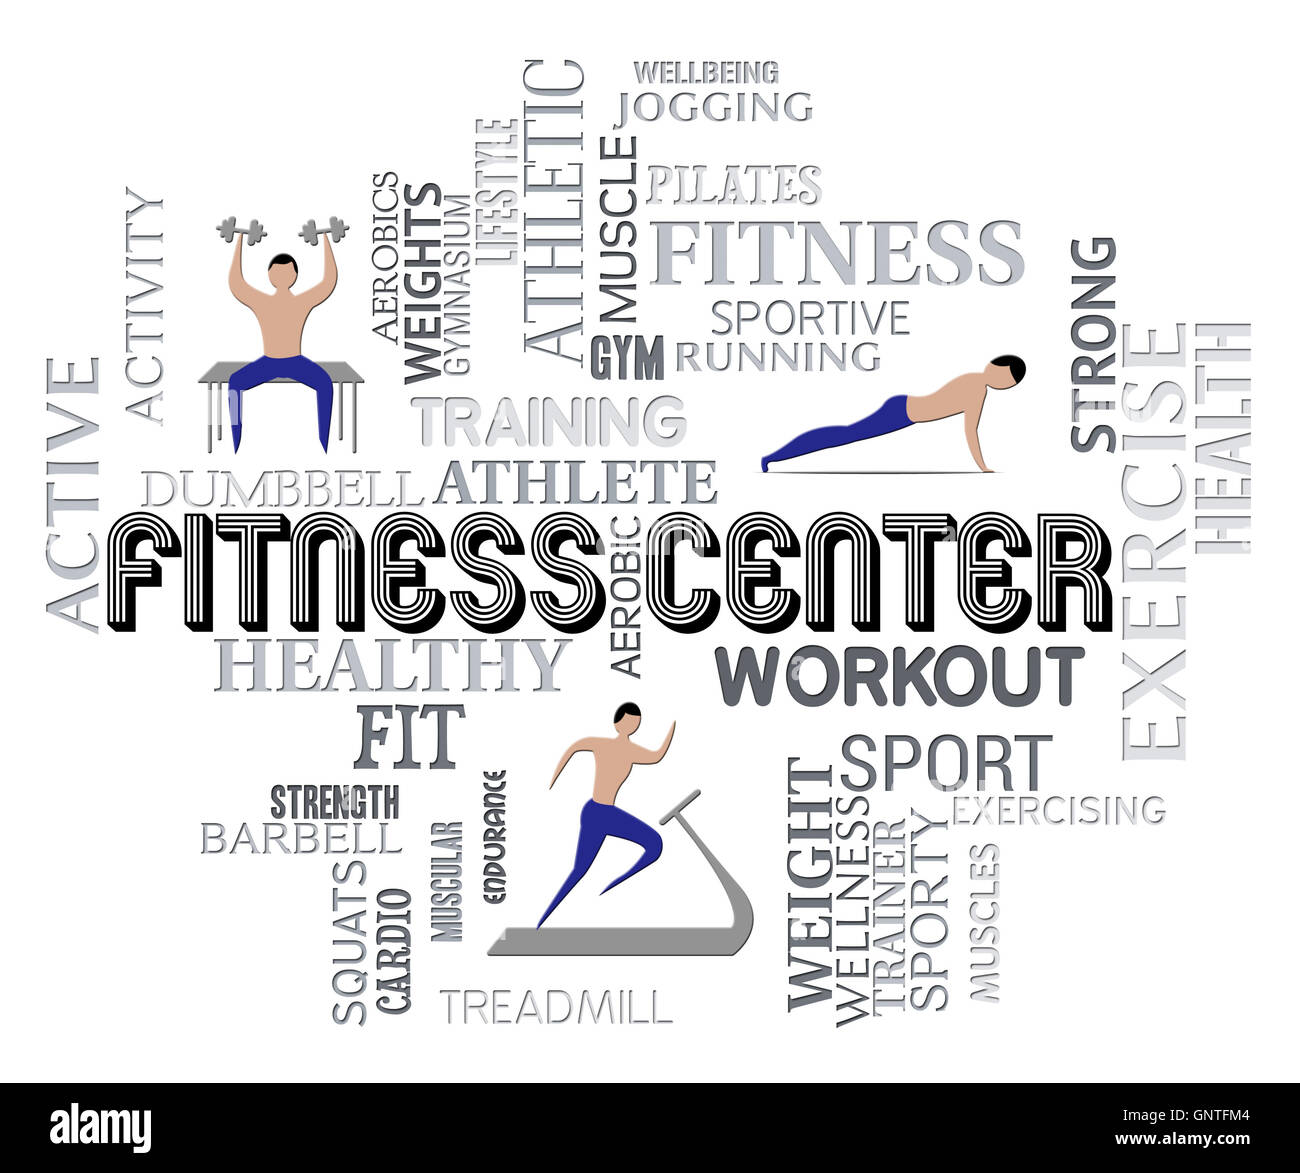 Fitness Center Meaning Work Out And Getting Fit GNTFM4 